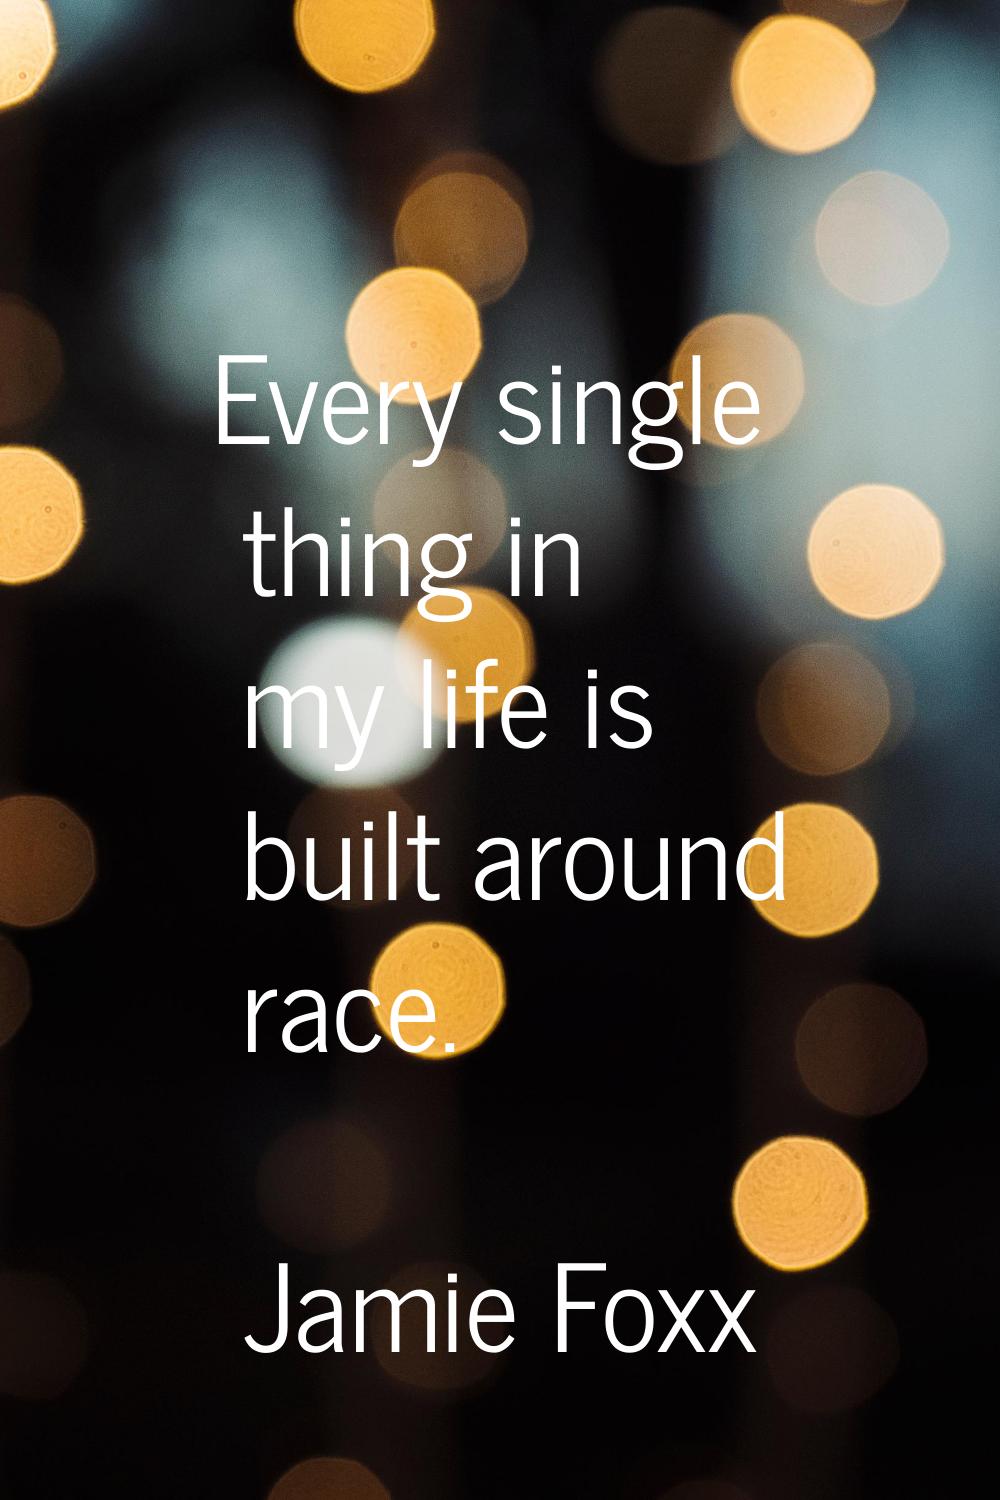 Every single thing in my life is built around race.